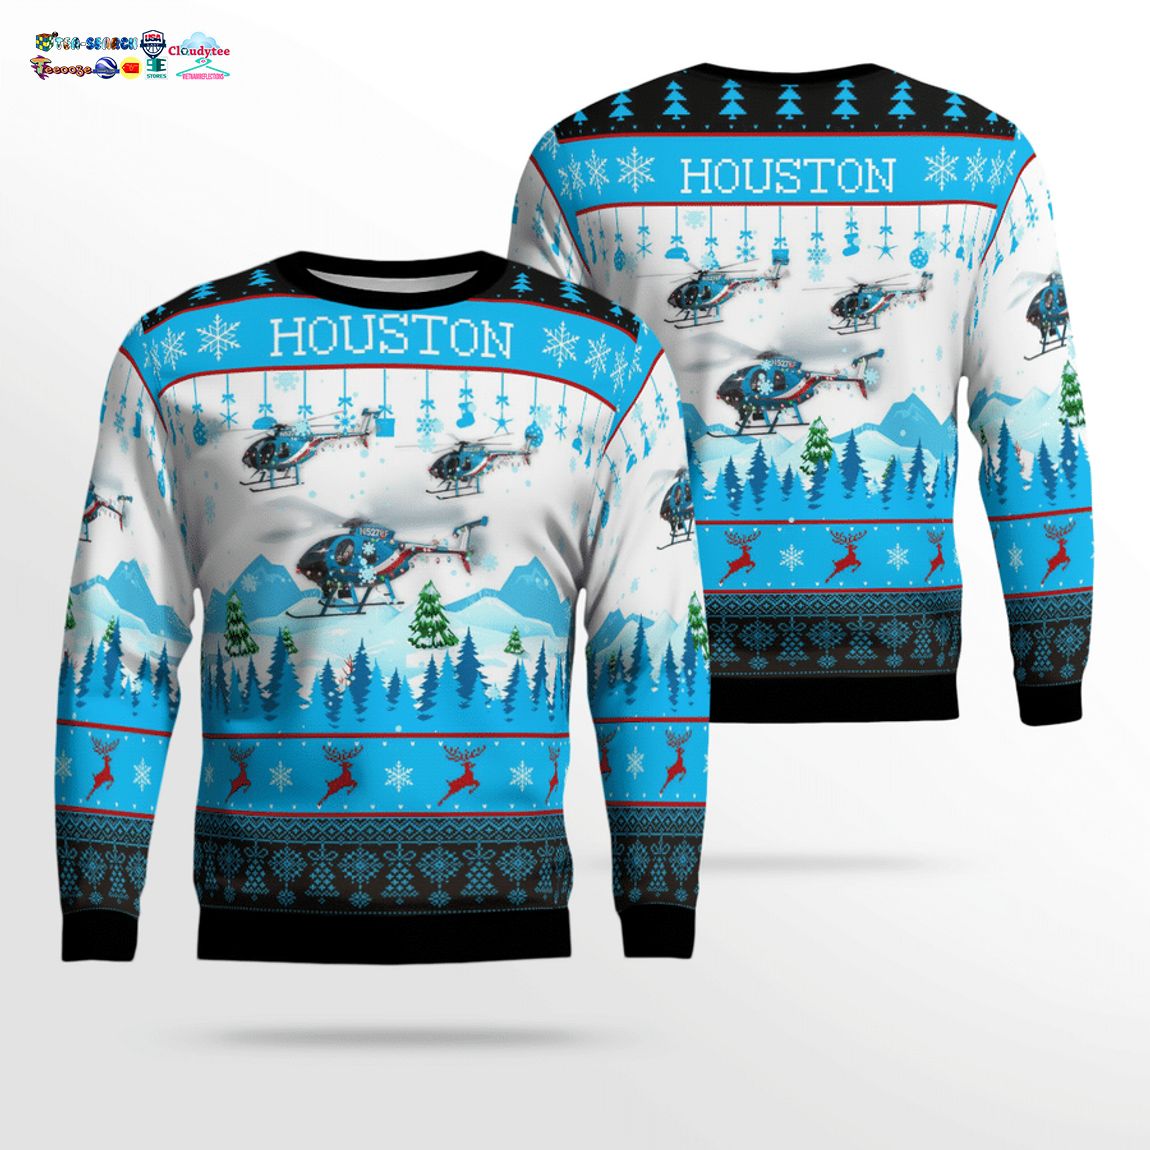 Houston Police Helicopter 78F N5278F 3D Christmas Sweater - Best click of yours